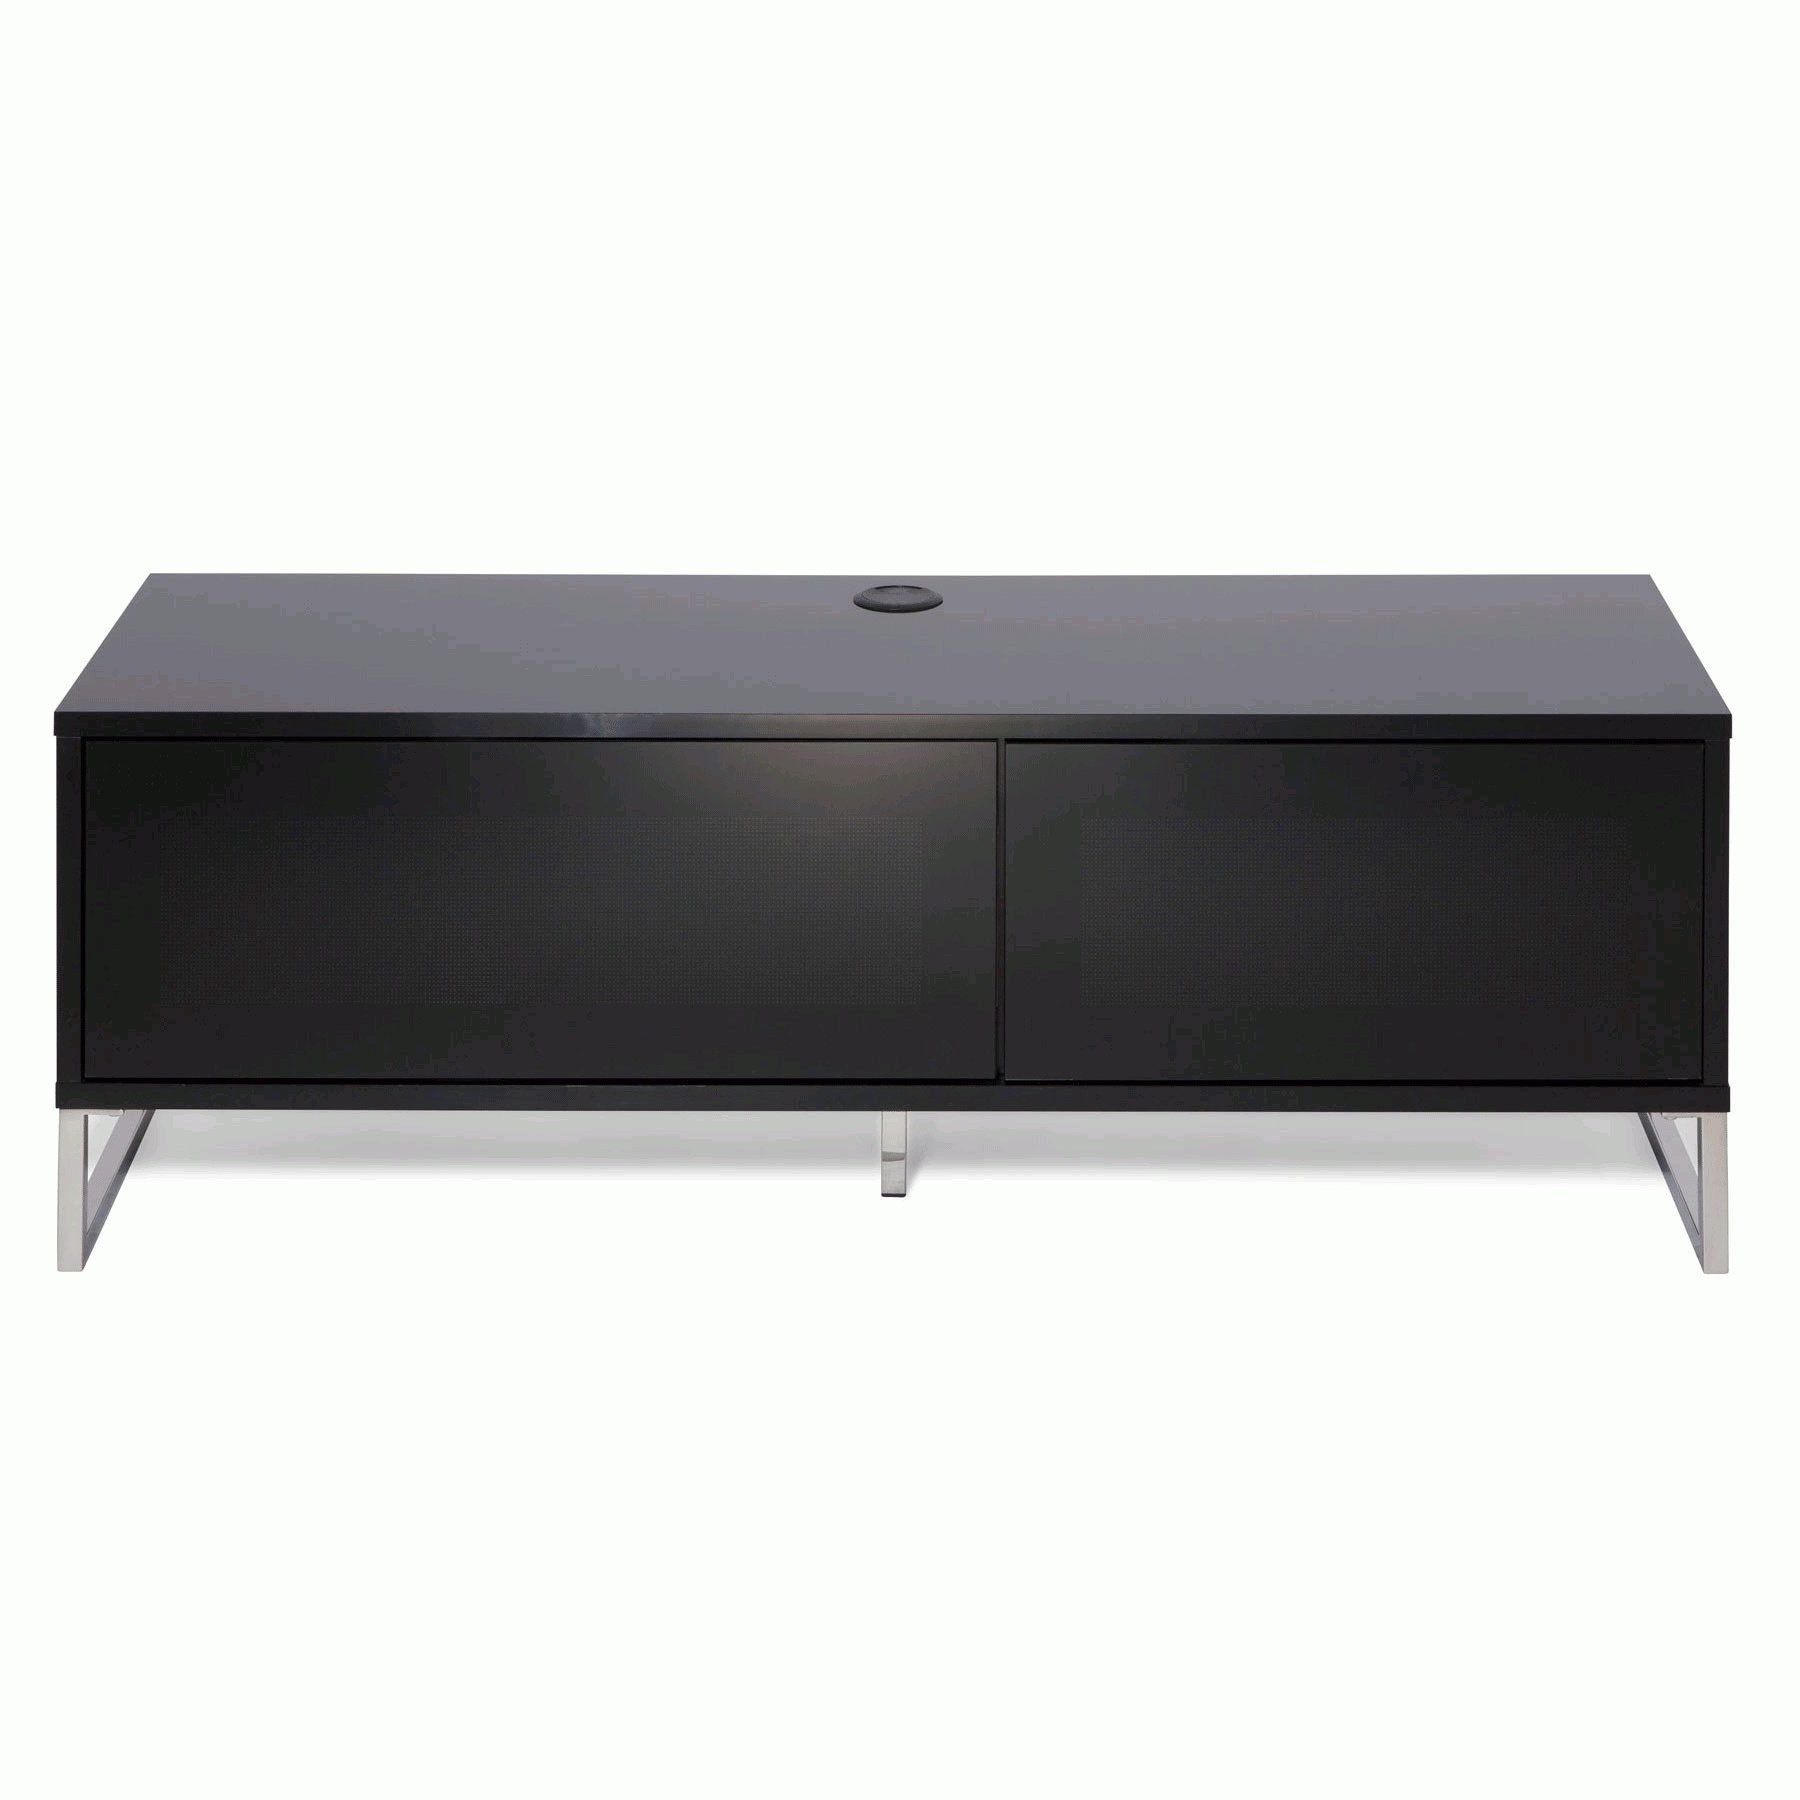 Alphason Helium 120cm Black Tv Stand For Up To 50" Tvs For Tv Stands For Tvs Up To 50" (Gallery 14 of 20)